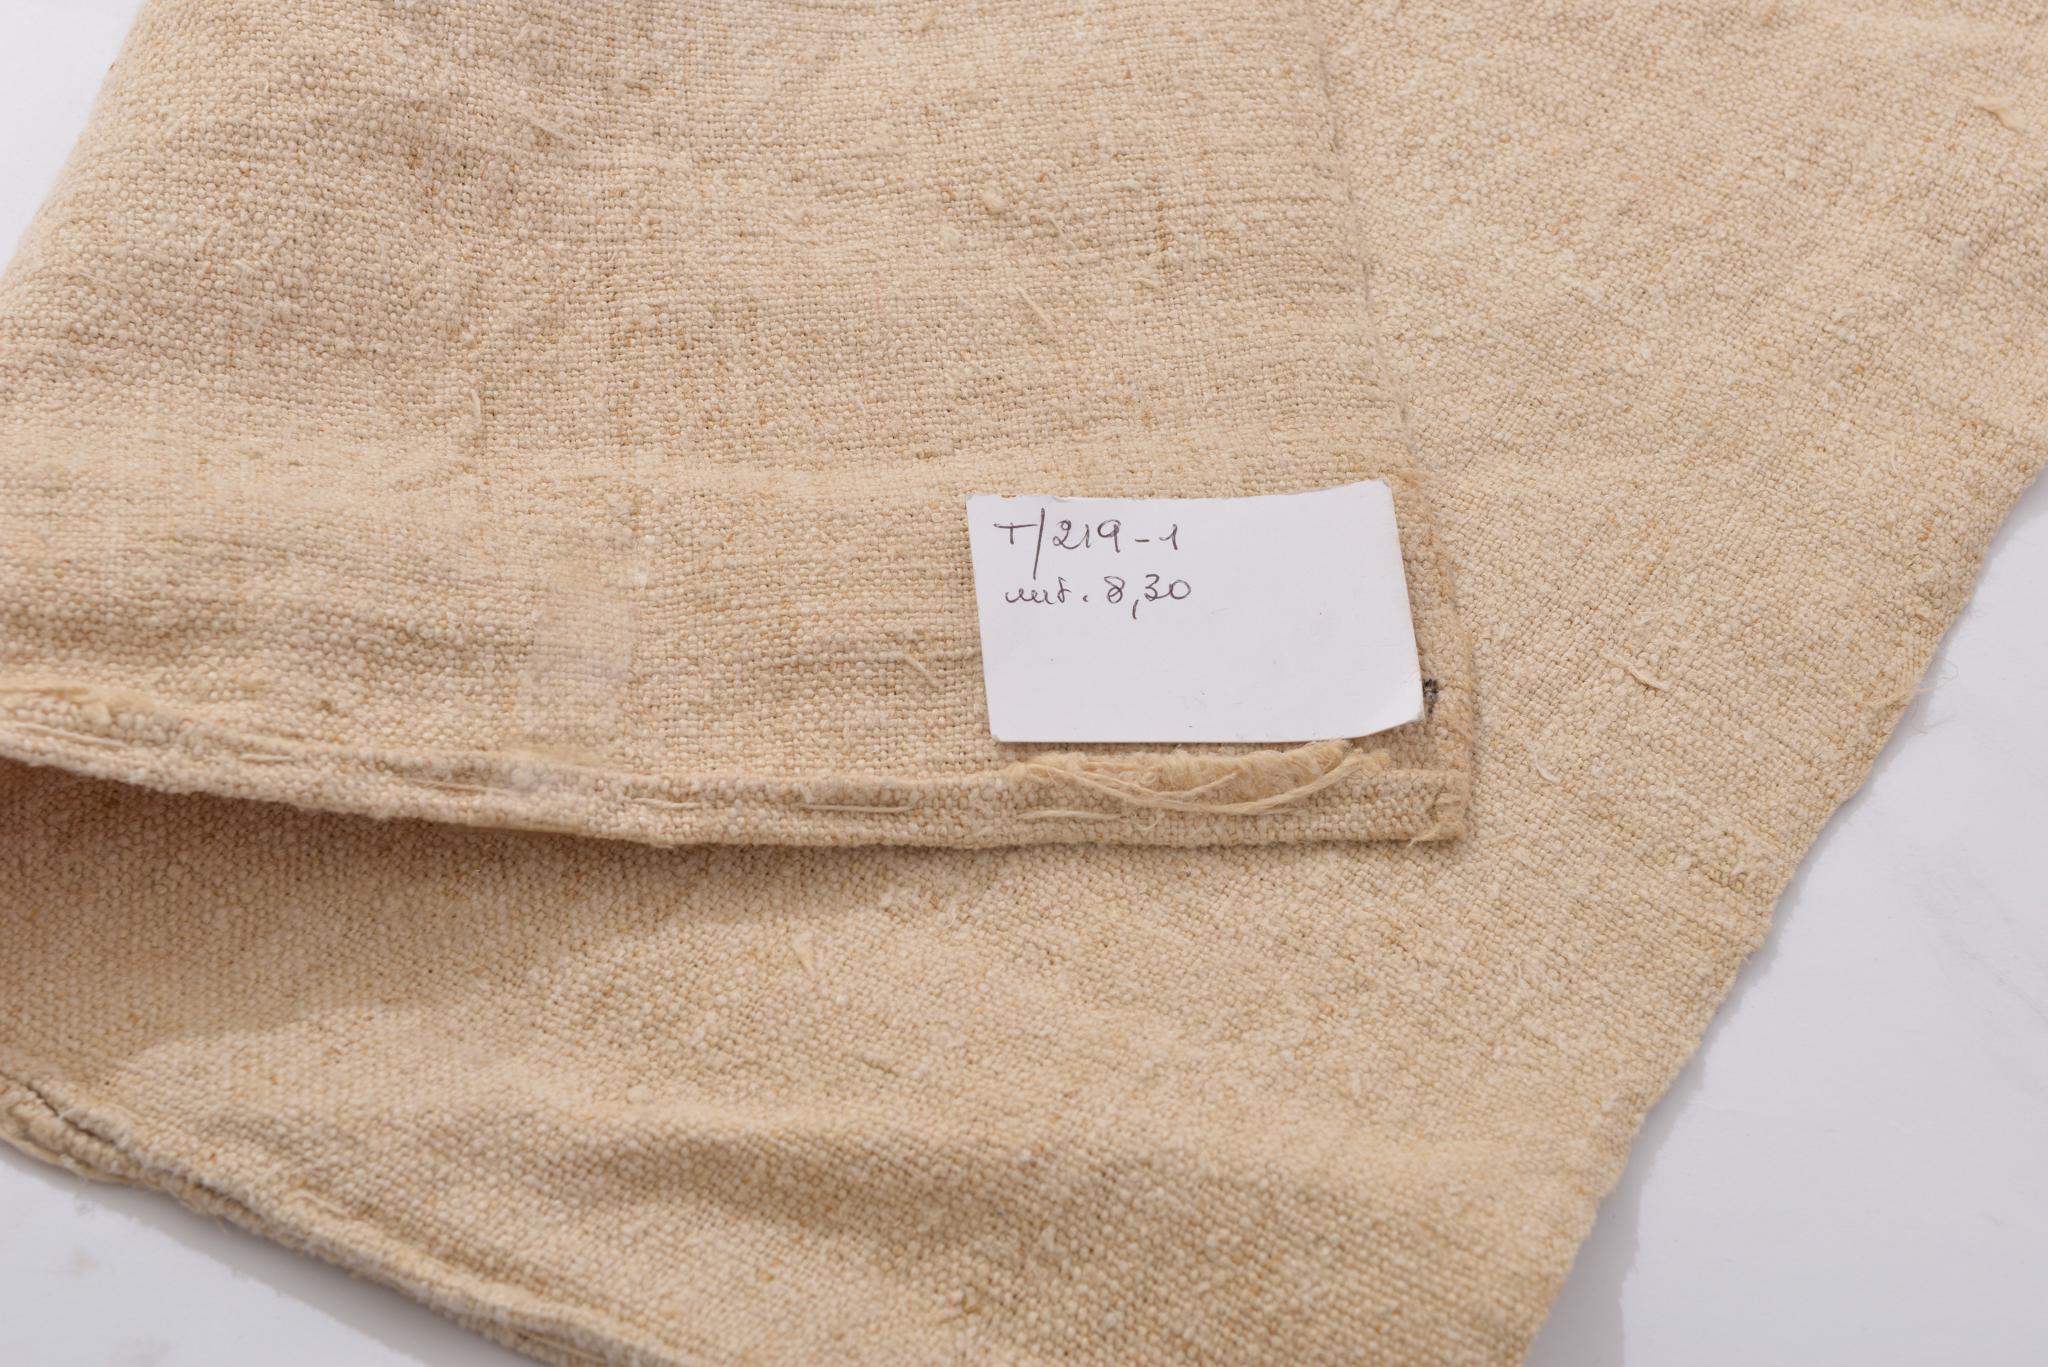 T/219/1 - This type of very strong and rustic fabric was used to make sacks, including those for mail: I have some saks, made up as a large country pillow. But it's hard enough to still find uncut rolls, like this one, perfect for upholstering